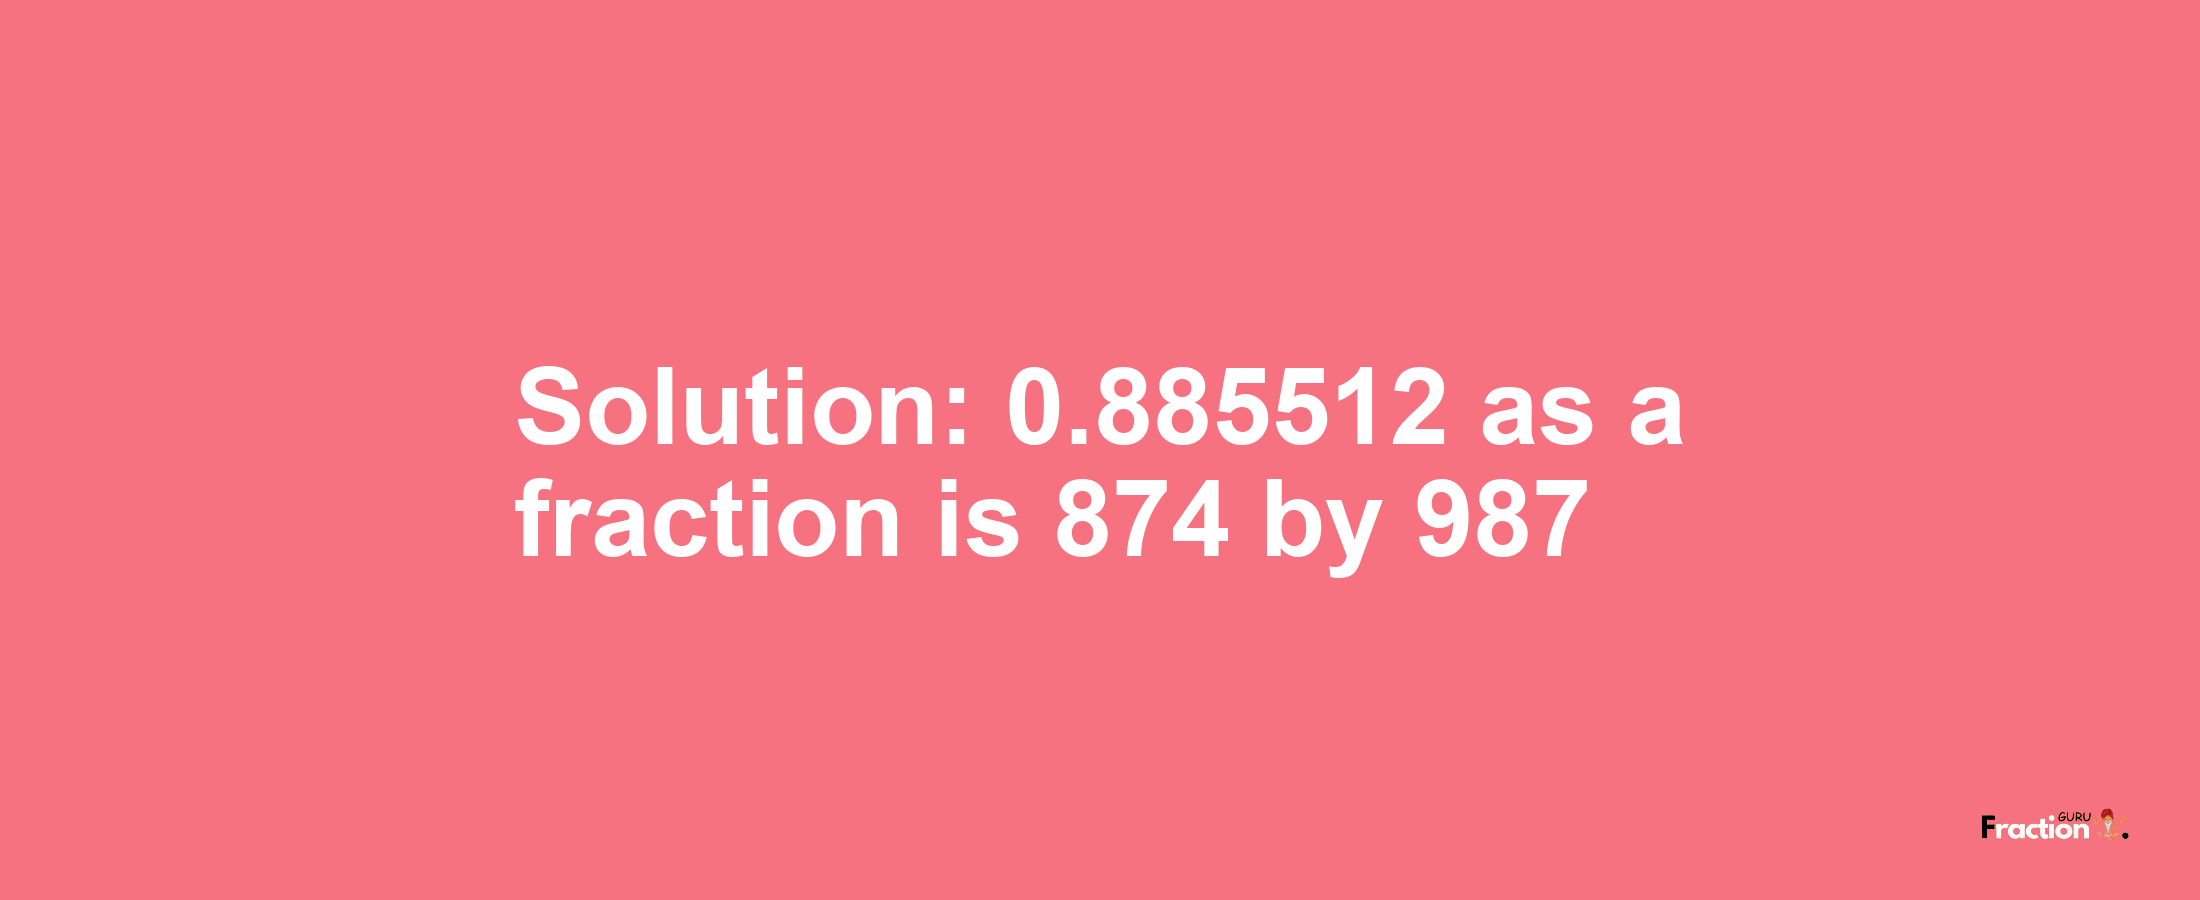 Solution:0.885512 as a fraction is 874/987